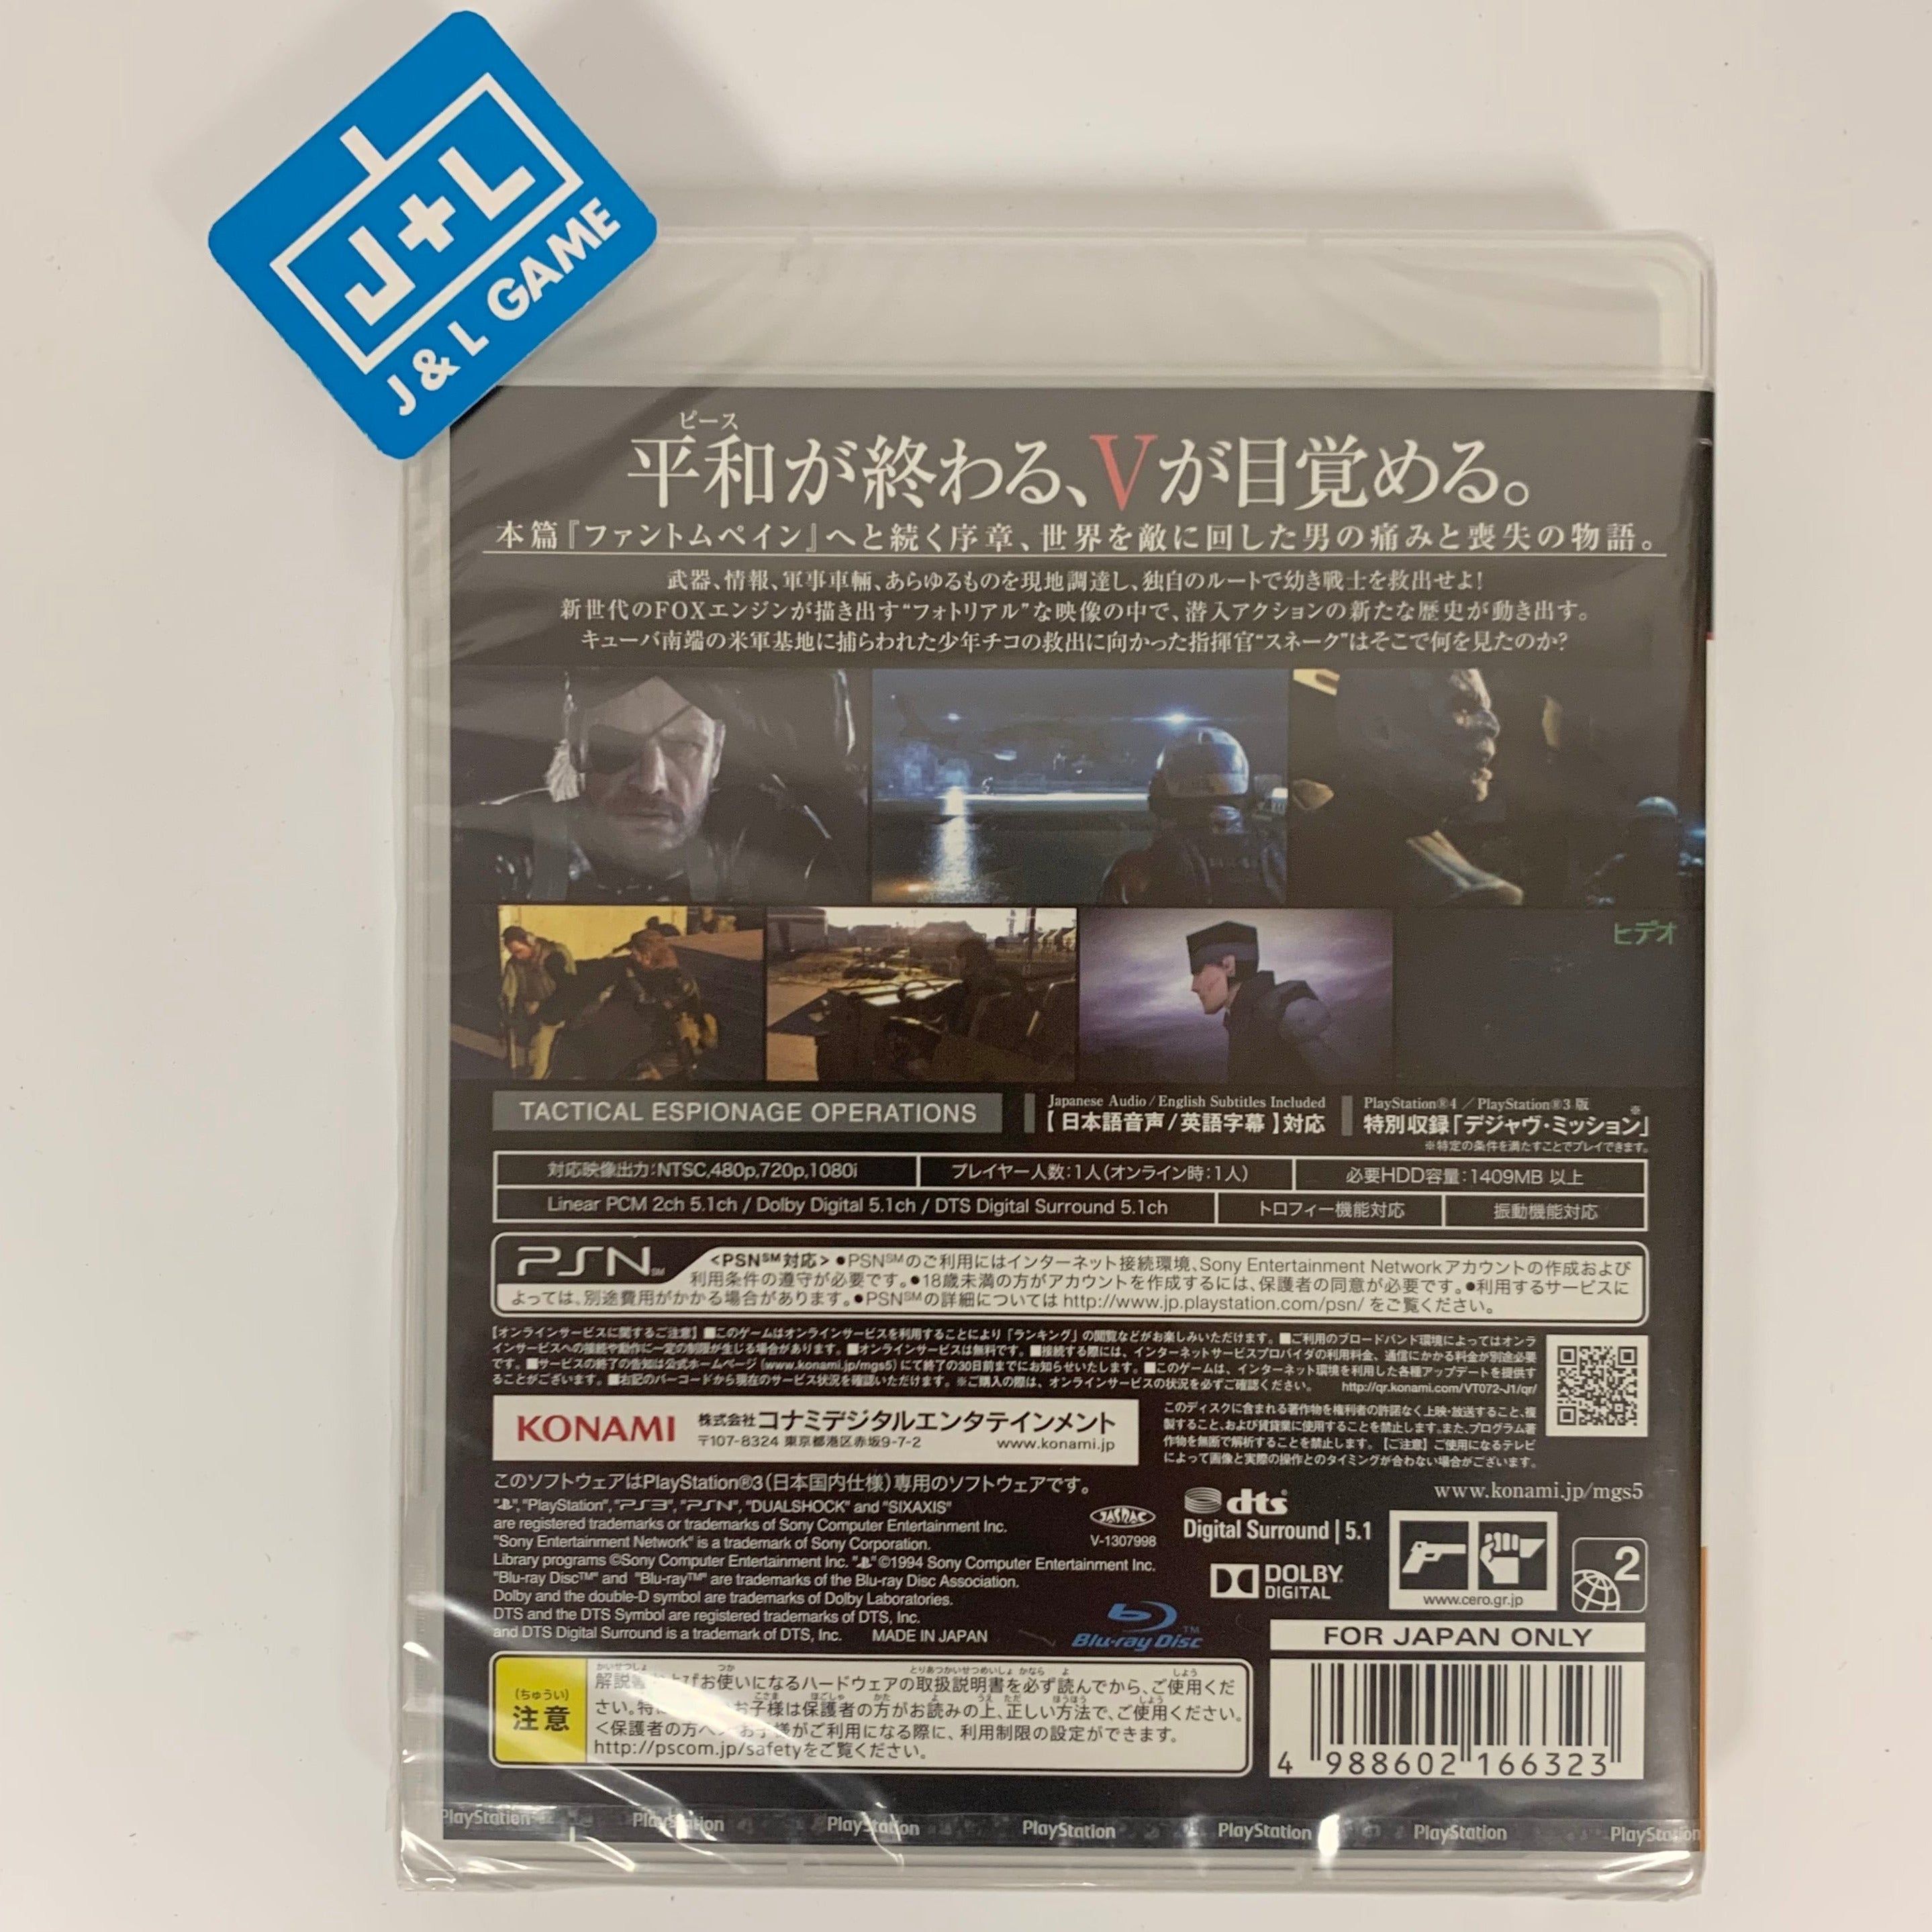 Metal Gear Solid V: Ground Zeroes (Premium Package) - (PS3) PlayStation 3 ( Japanese Import ) Video Games Konami   